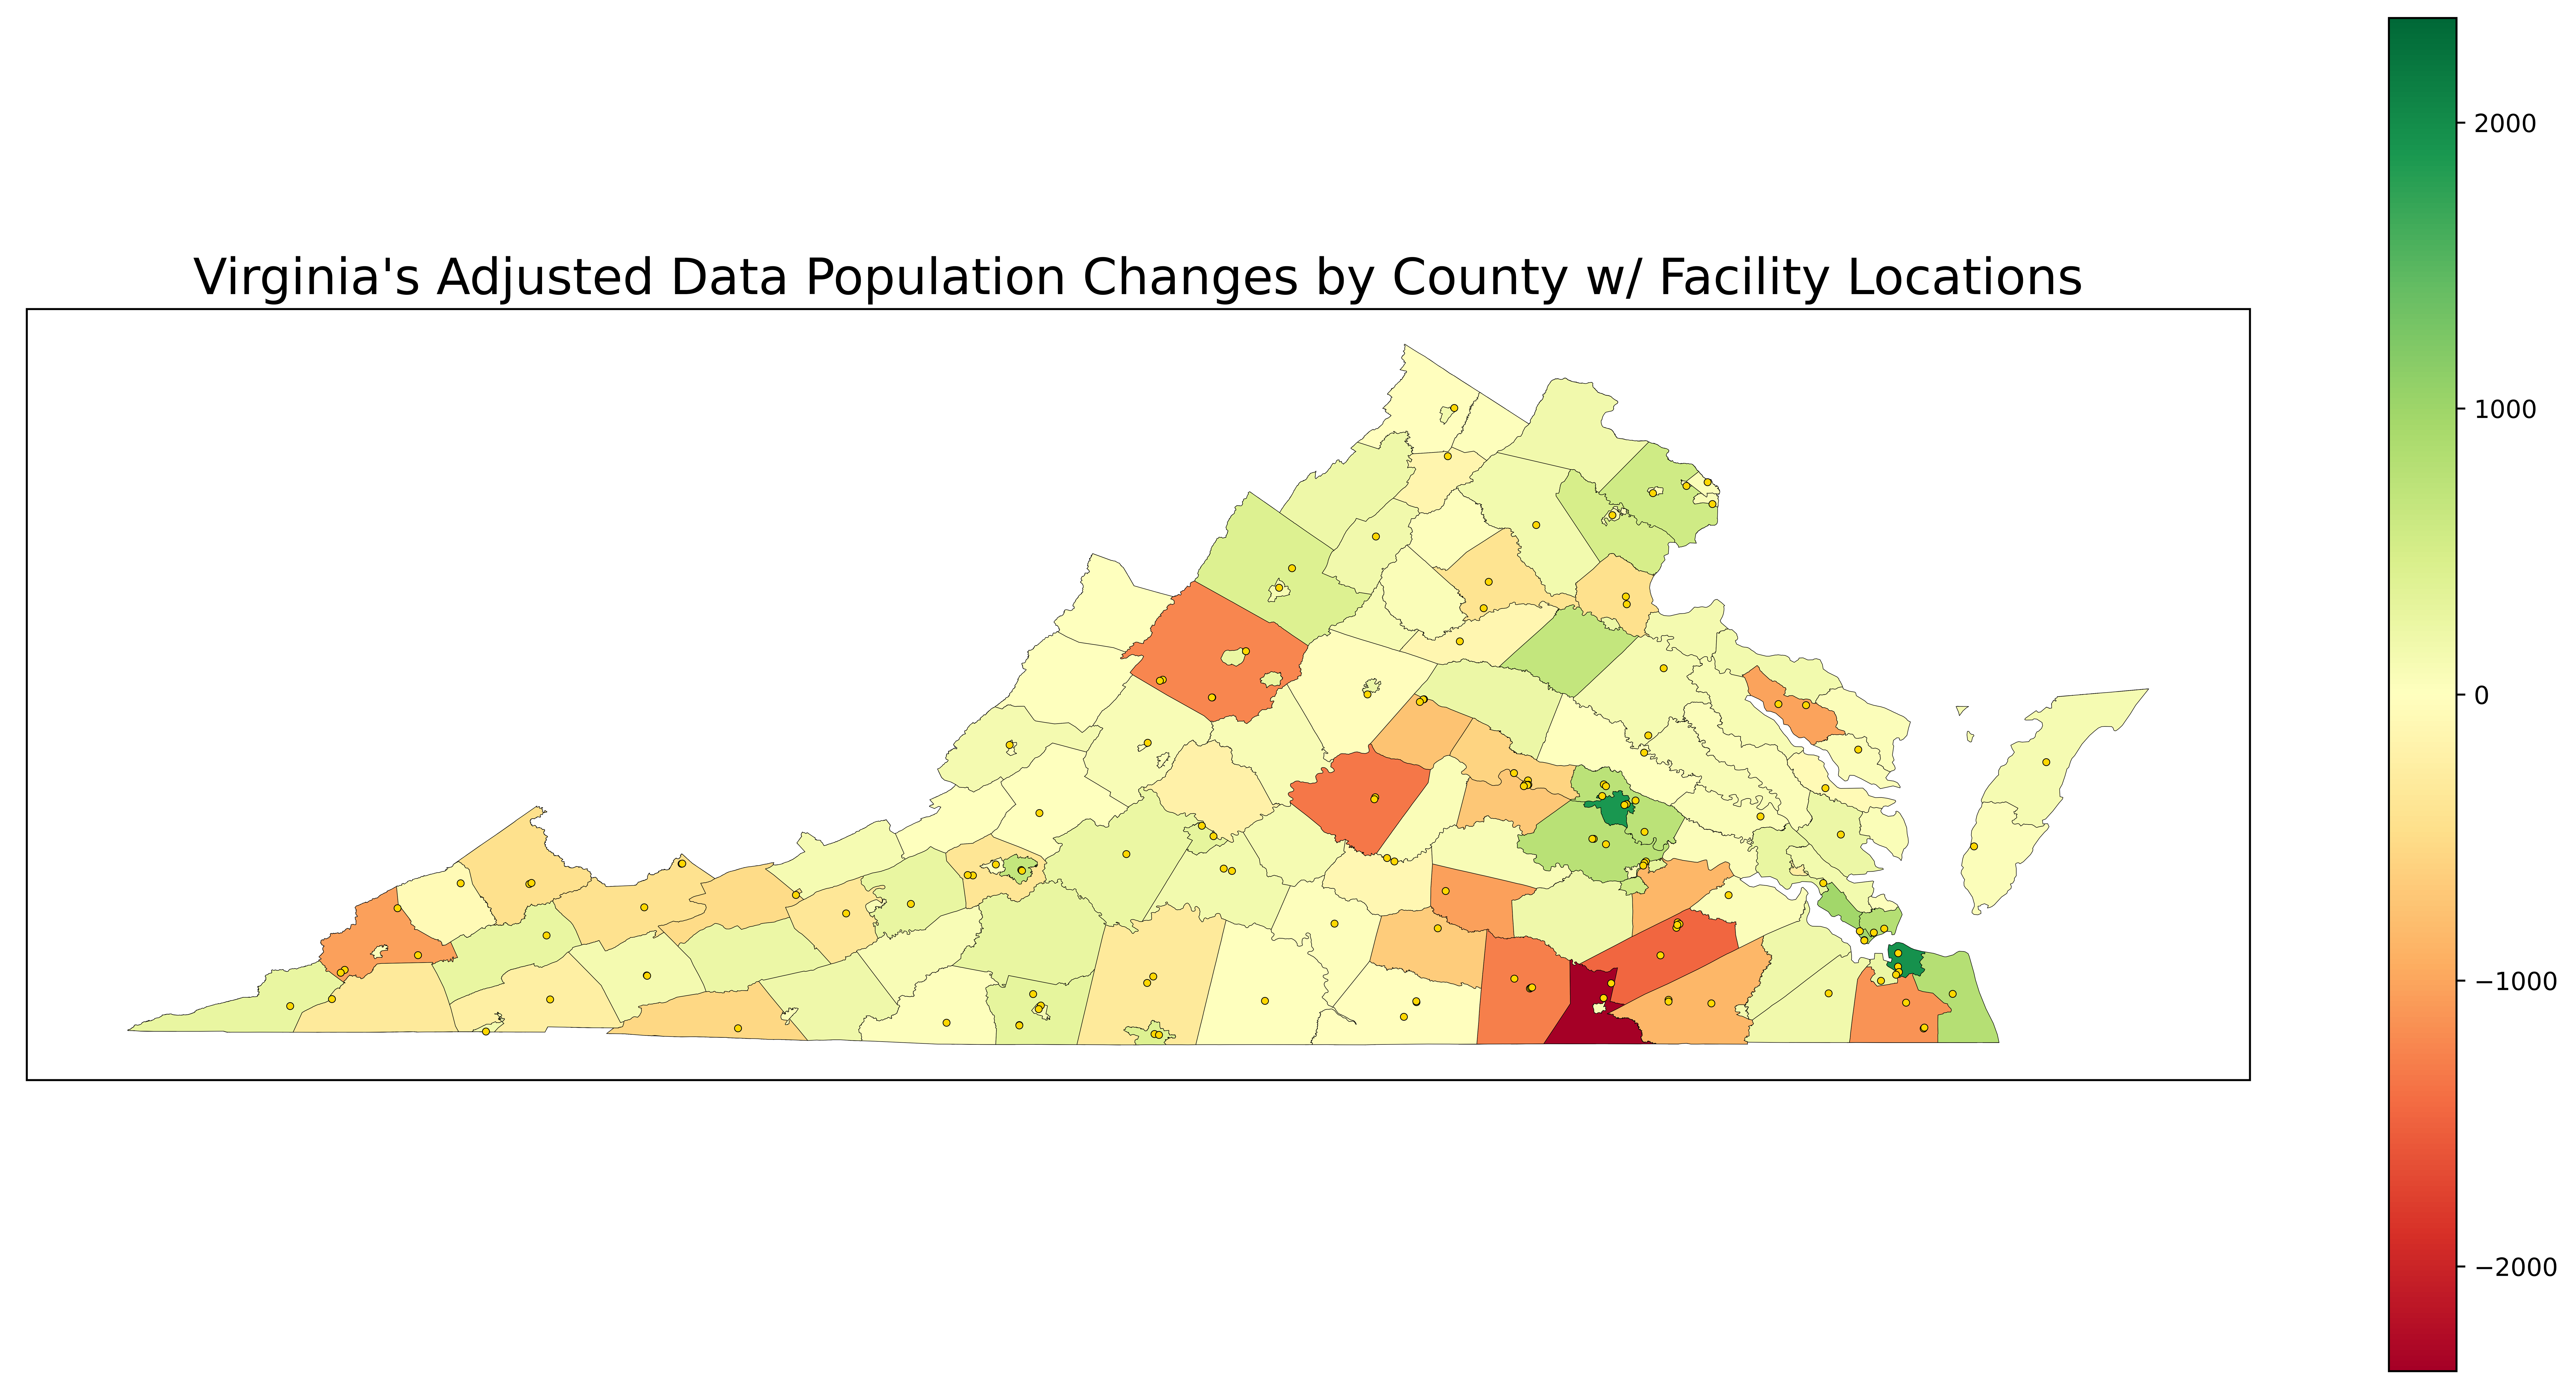 Virginia's Adjusted Data Population Changes by County with Facility Locations